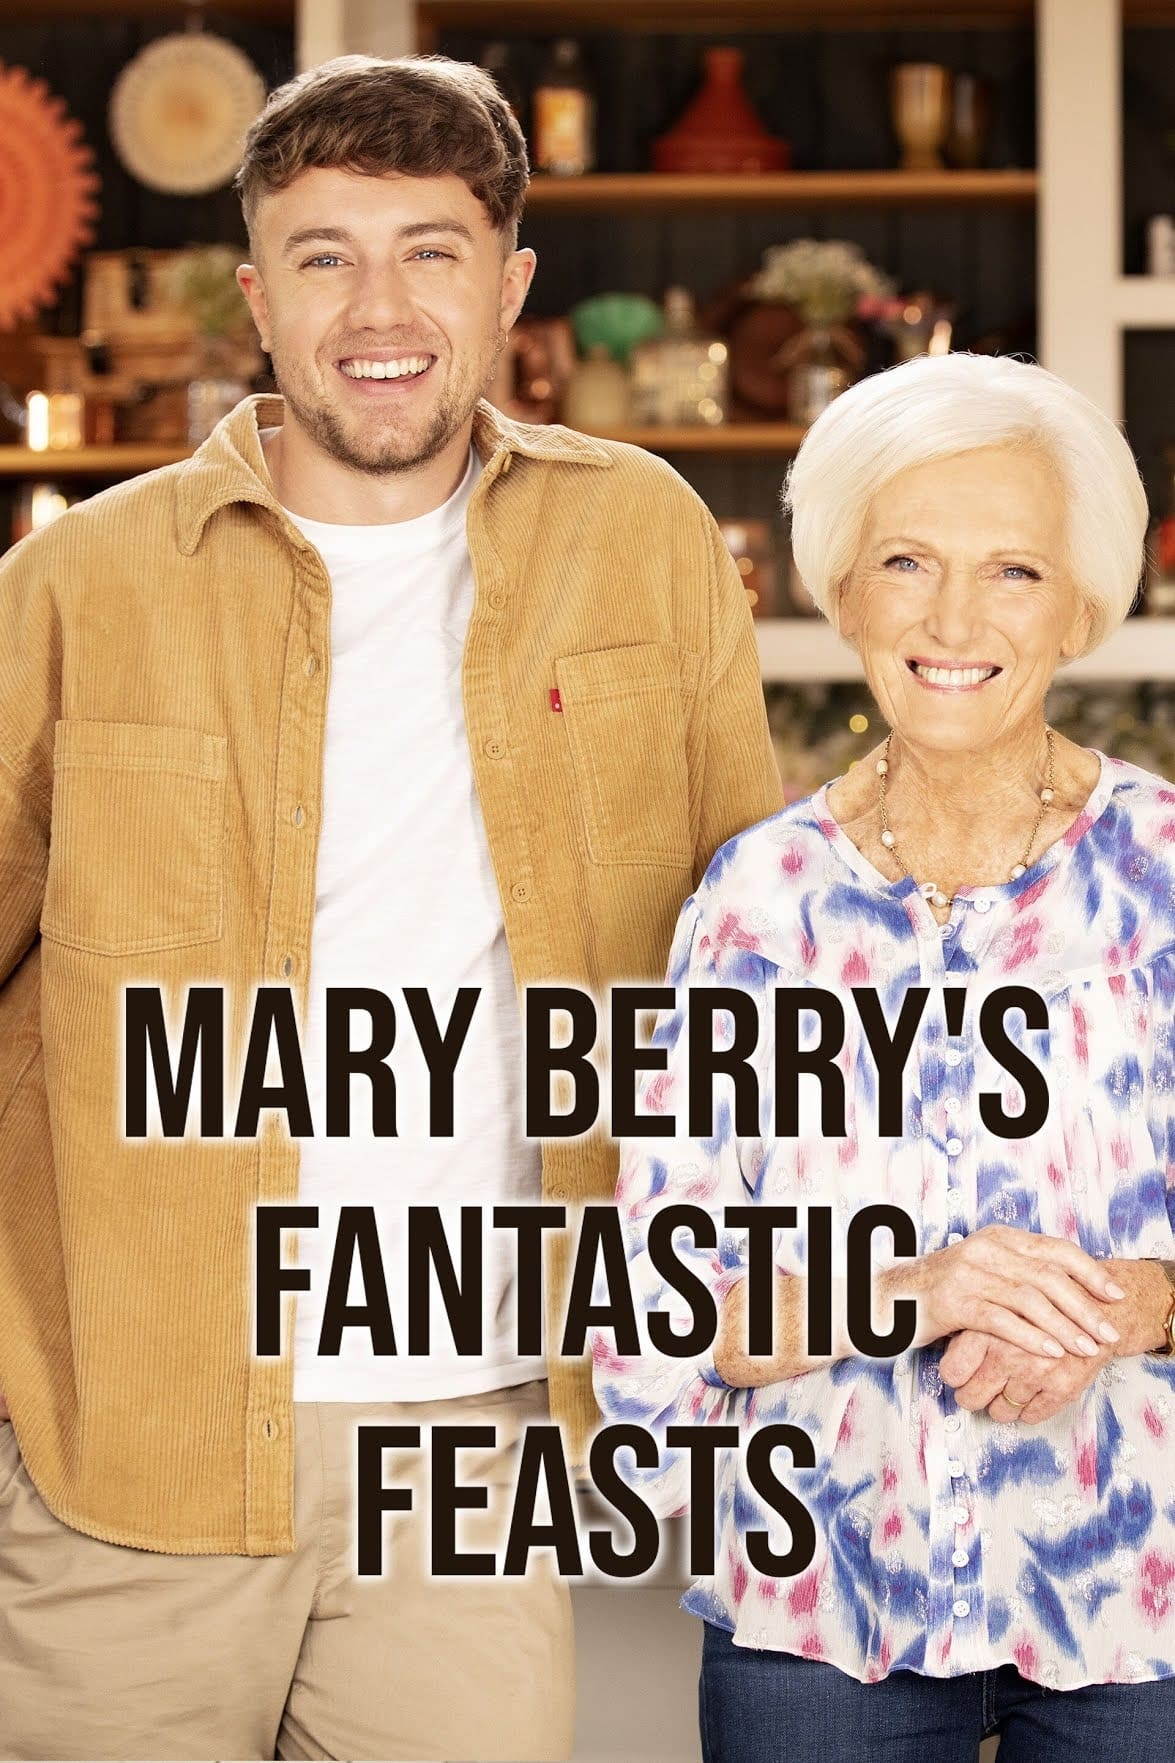 Mary Berry's Fantastic Feasts